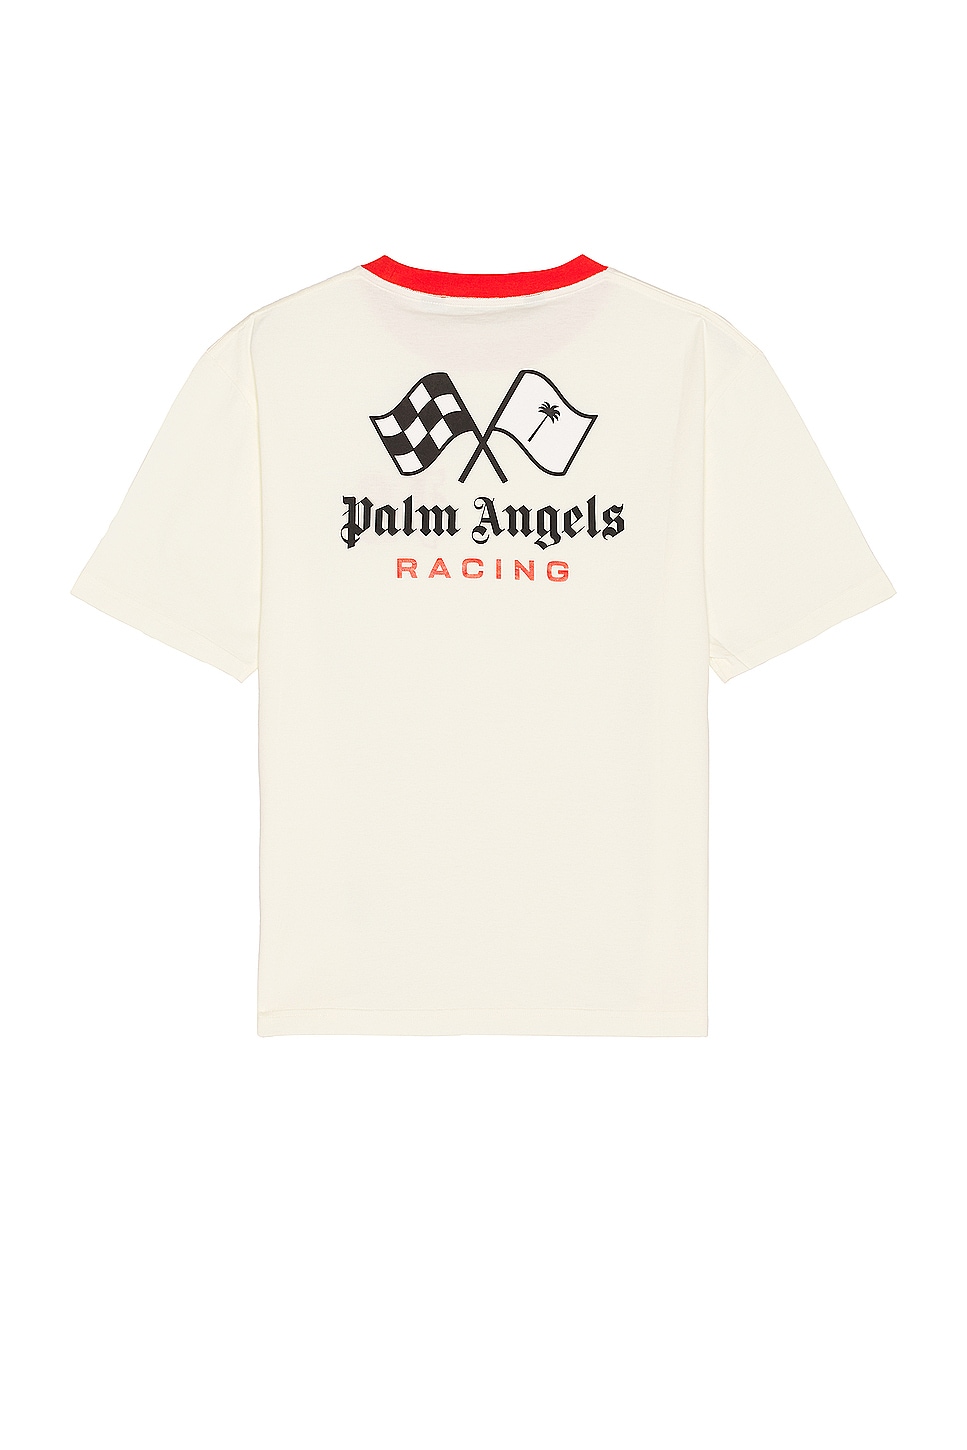 Image 1 of Palm Angels X Formula 1 Racing Monogram Tee in White, Black, & Red